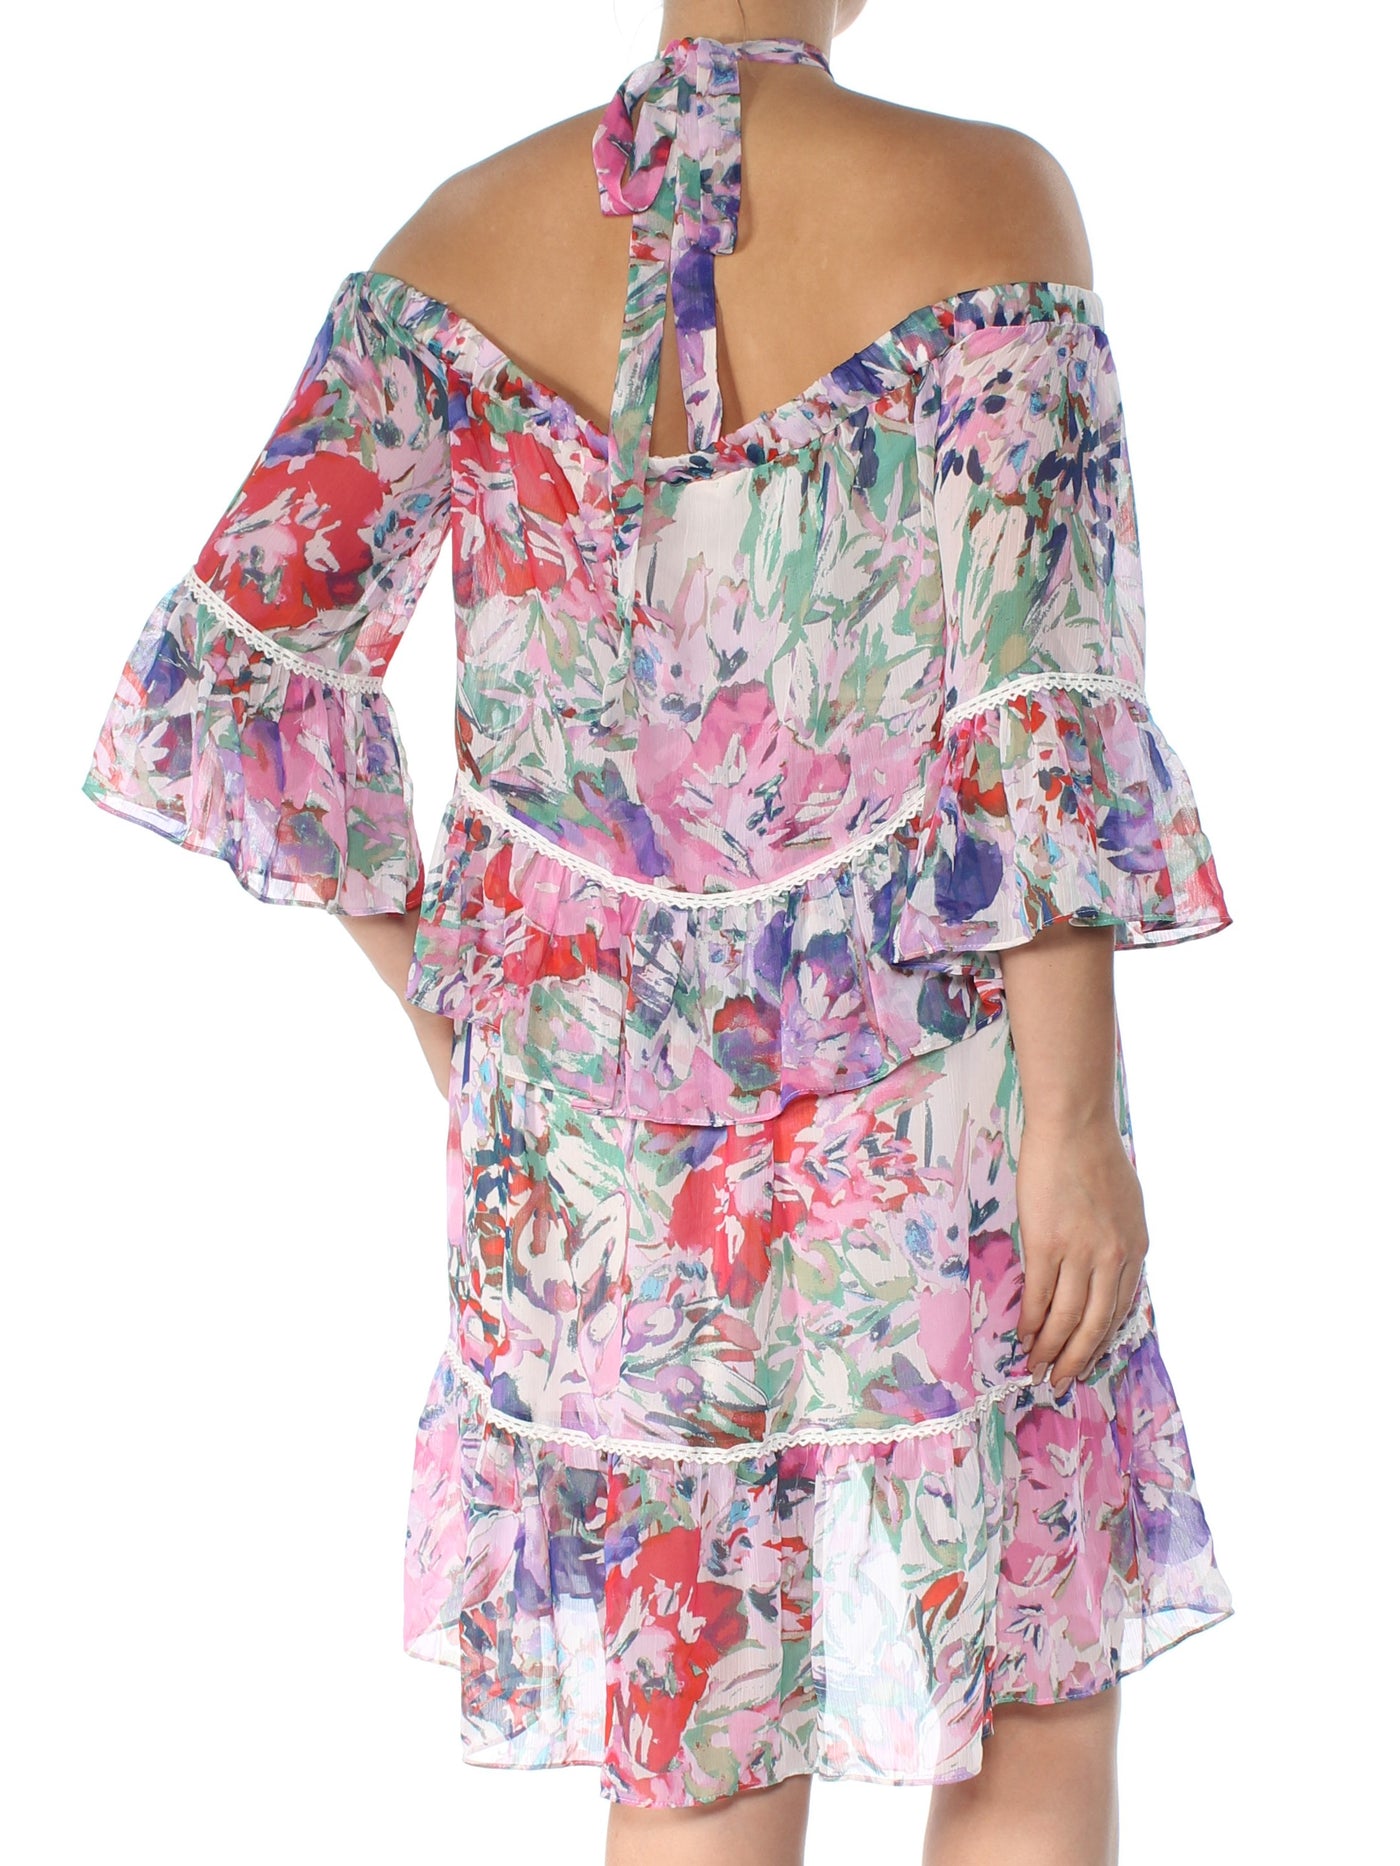 RACHEL ROY Womens Pink Cold Shoulder Printed 3/4 Sleeve Grecian Neckline Above The Knee Cocktail Blouson Dress